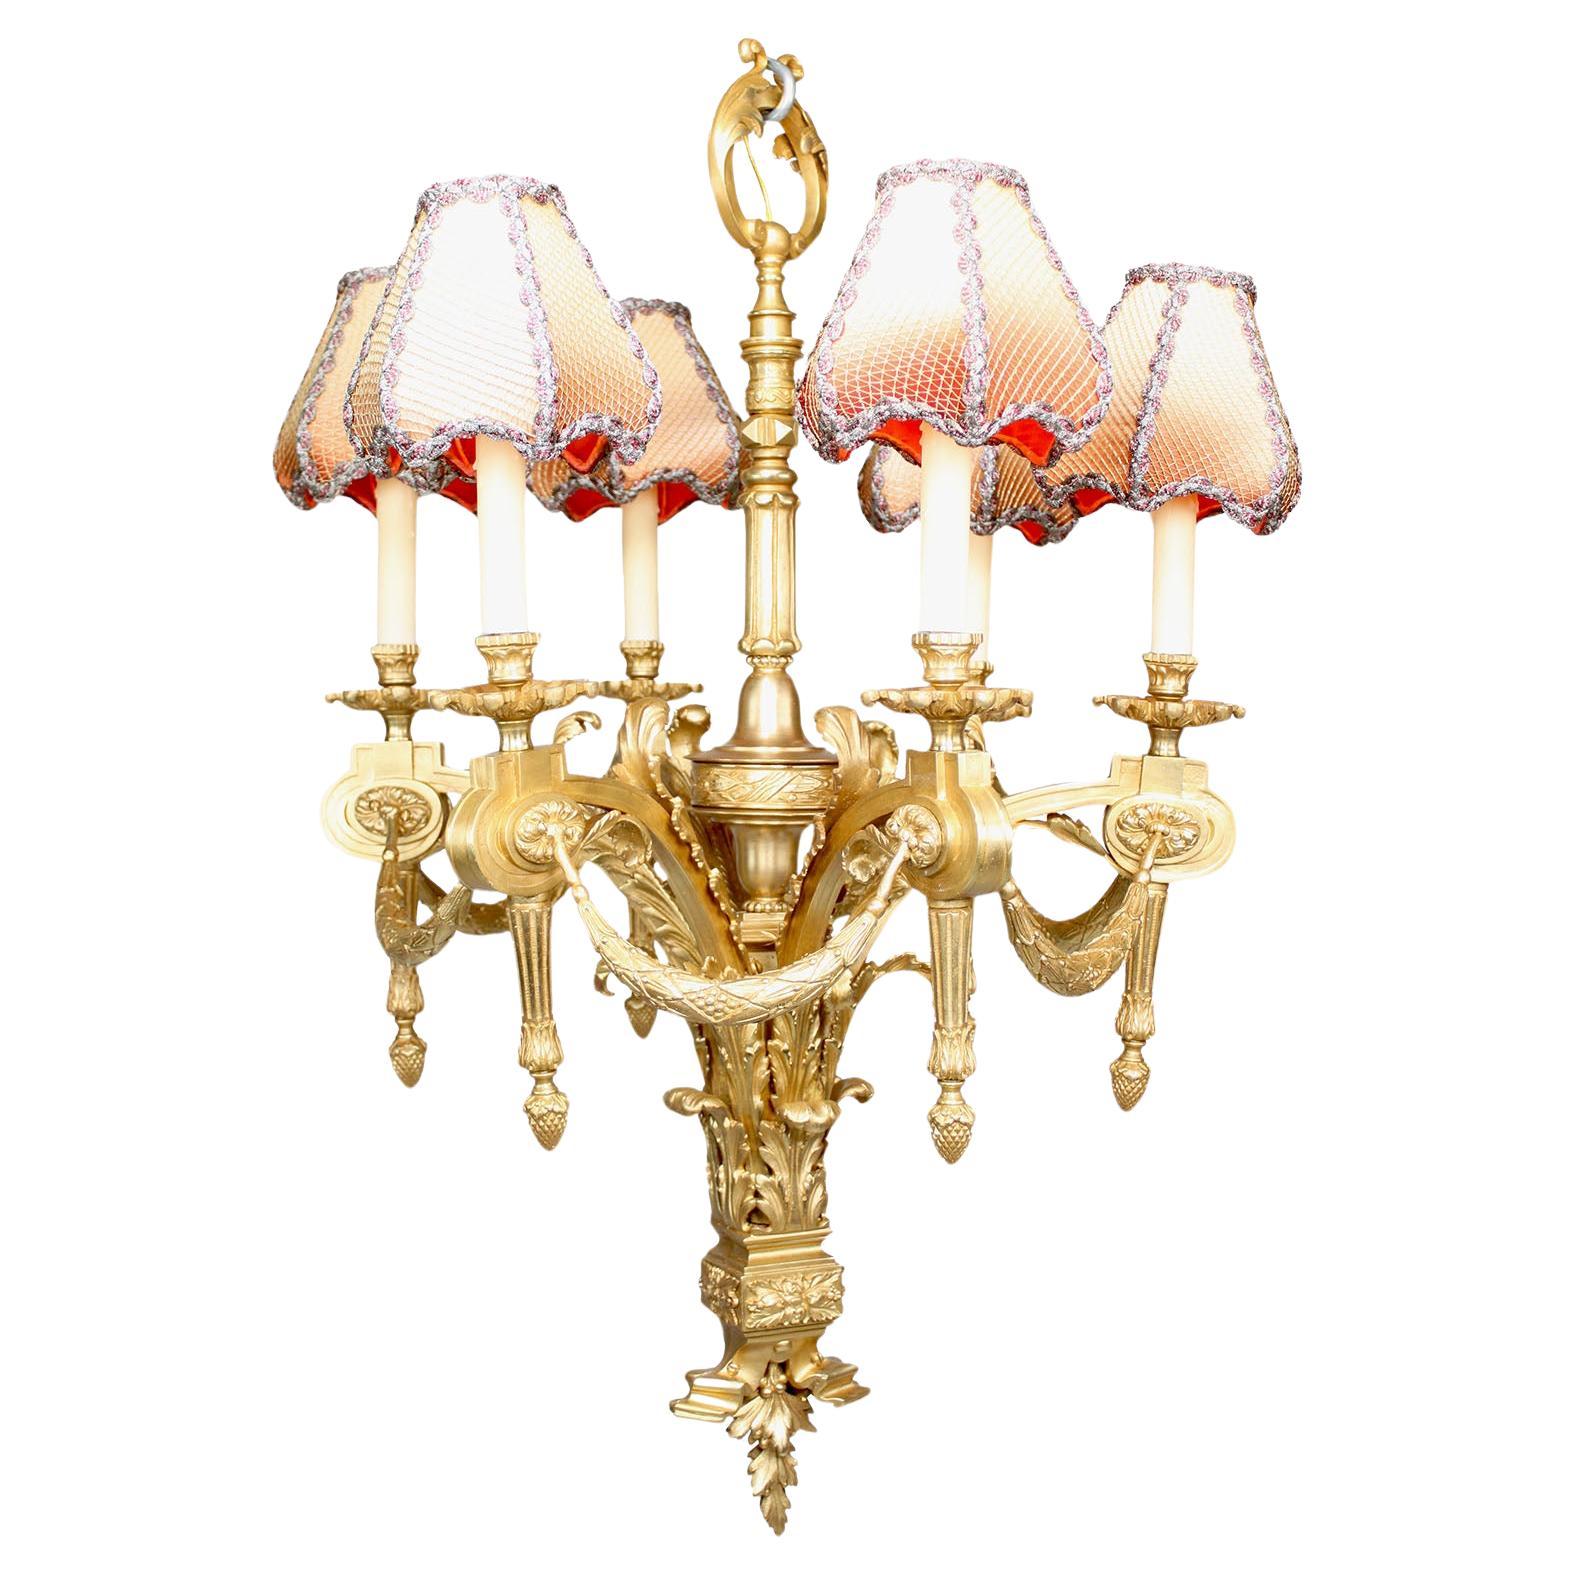 French 19th-20th Century Louis XVI Style Gilt Bronze Six-Light Chandelier For Sale